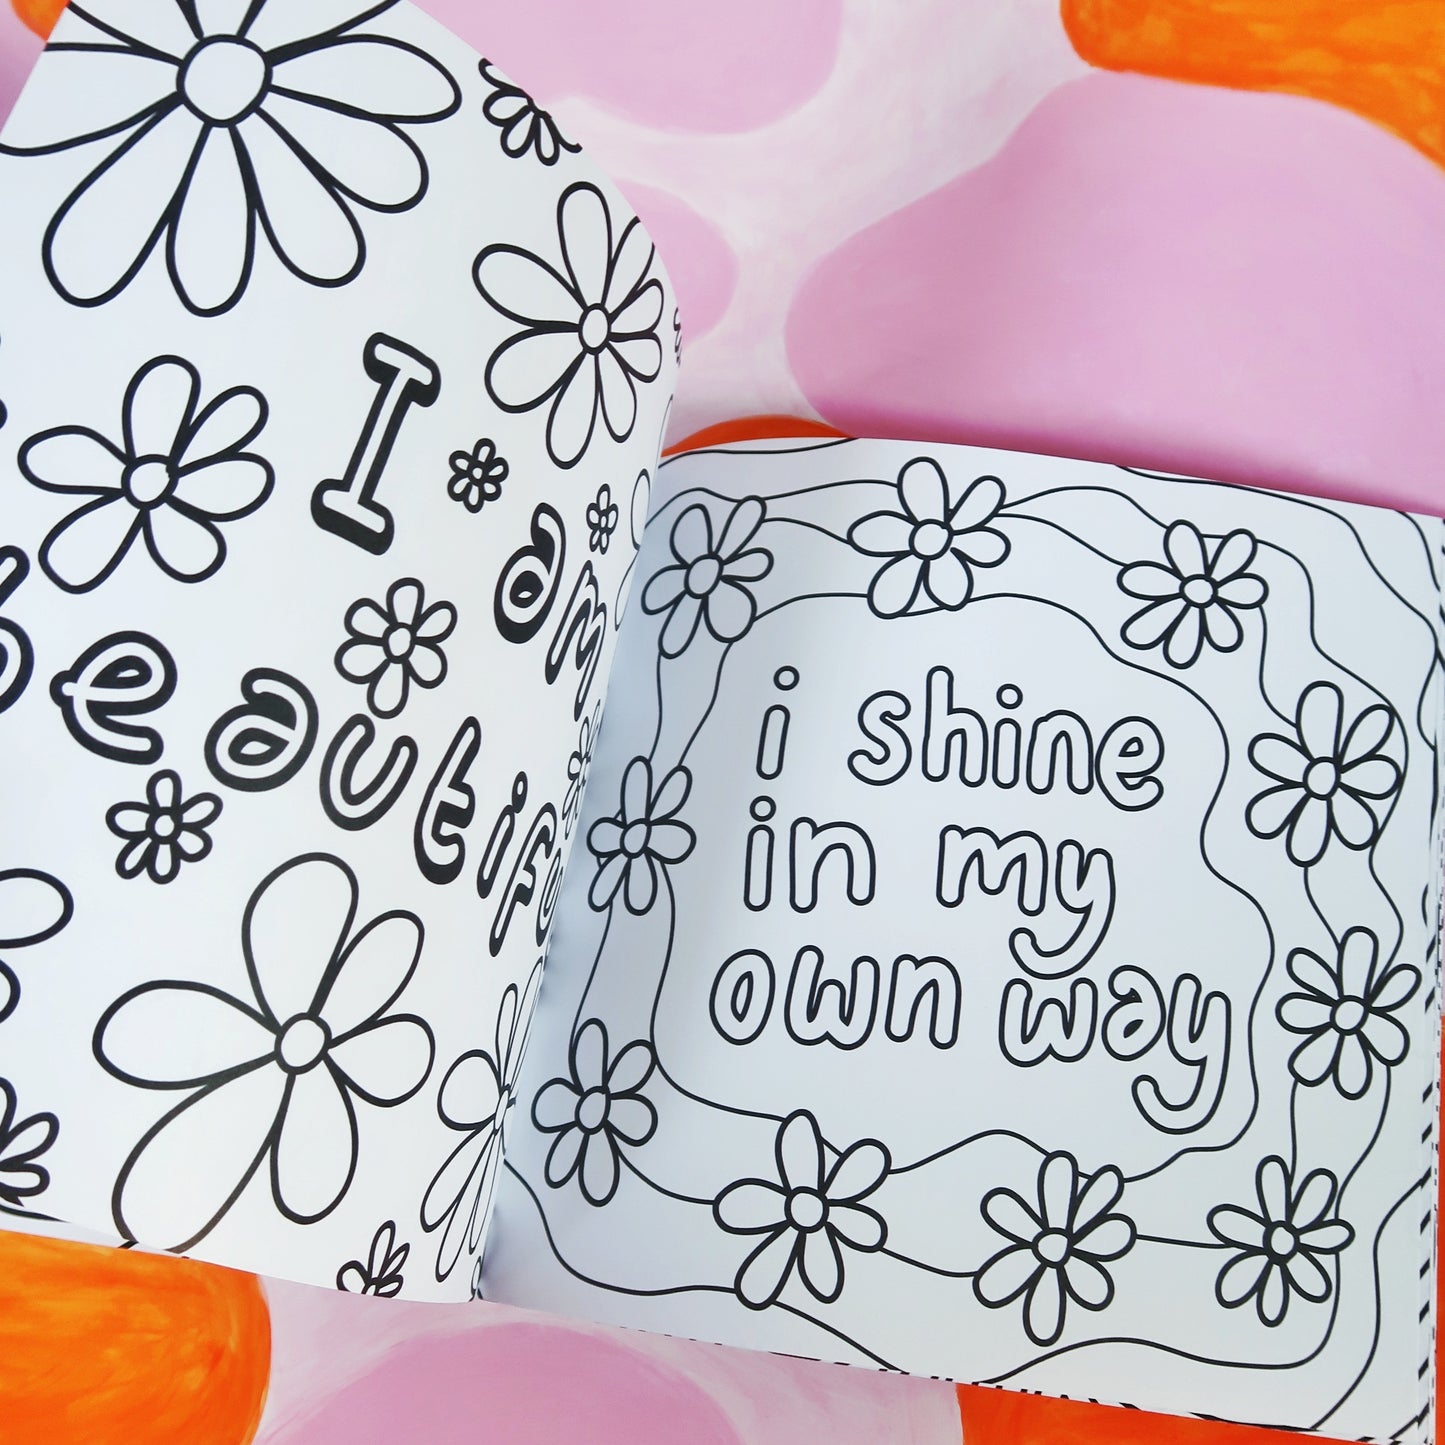 affirmation colouring book